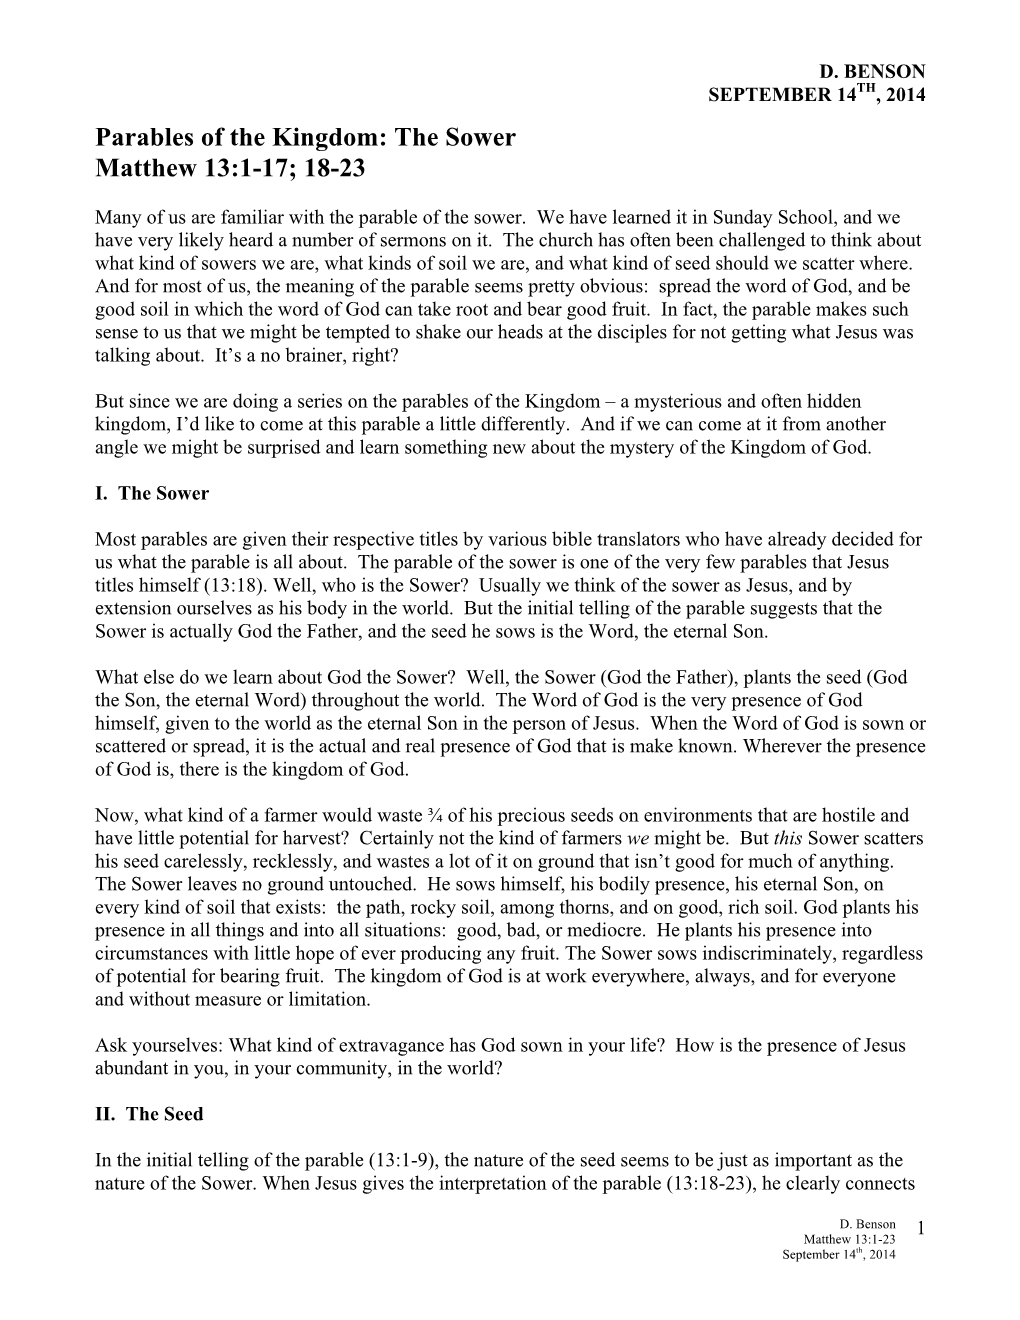 Parables of the Kingdom: the Sower Matthew 13:1-17; 18-23